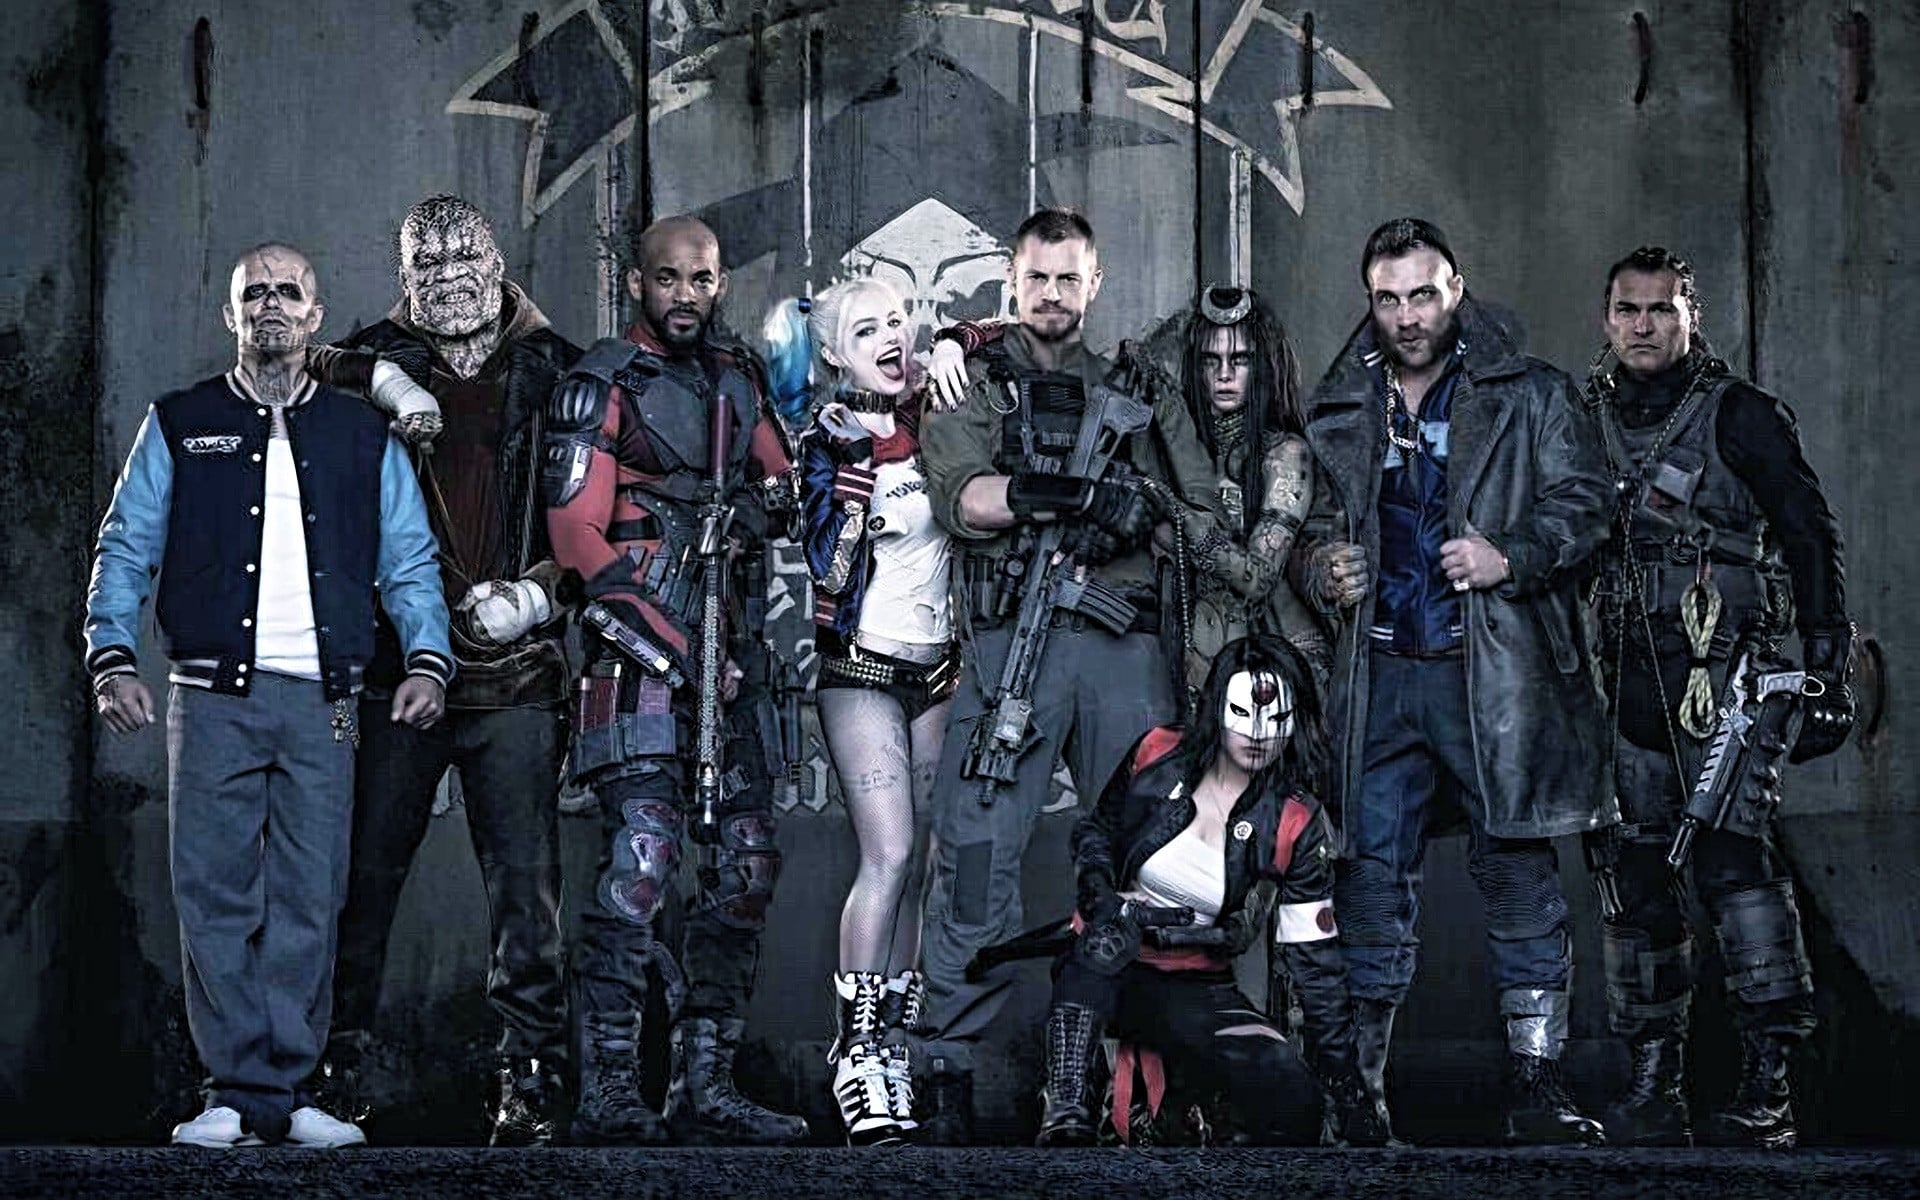 Suicide Squad: New poster released